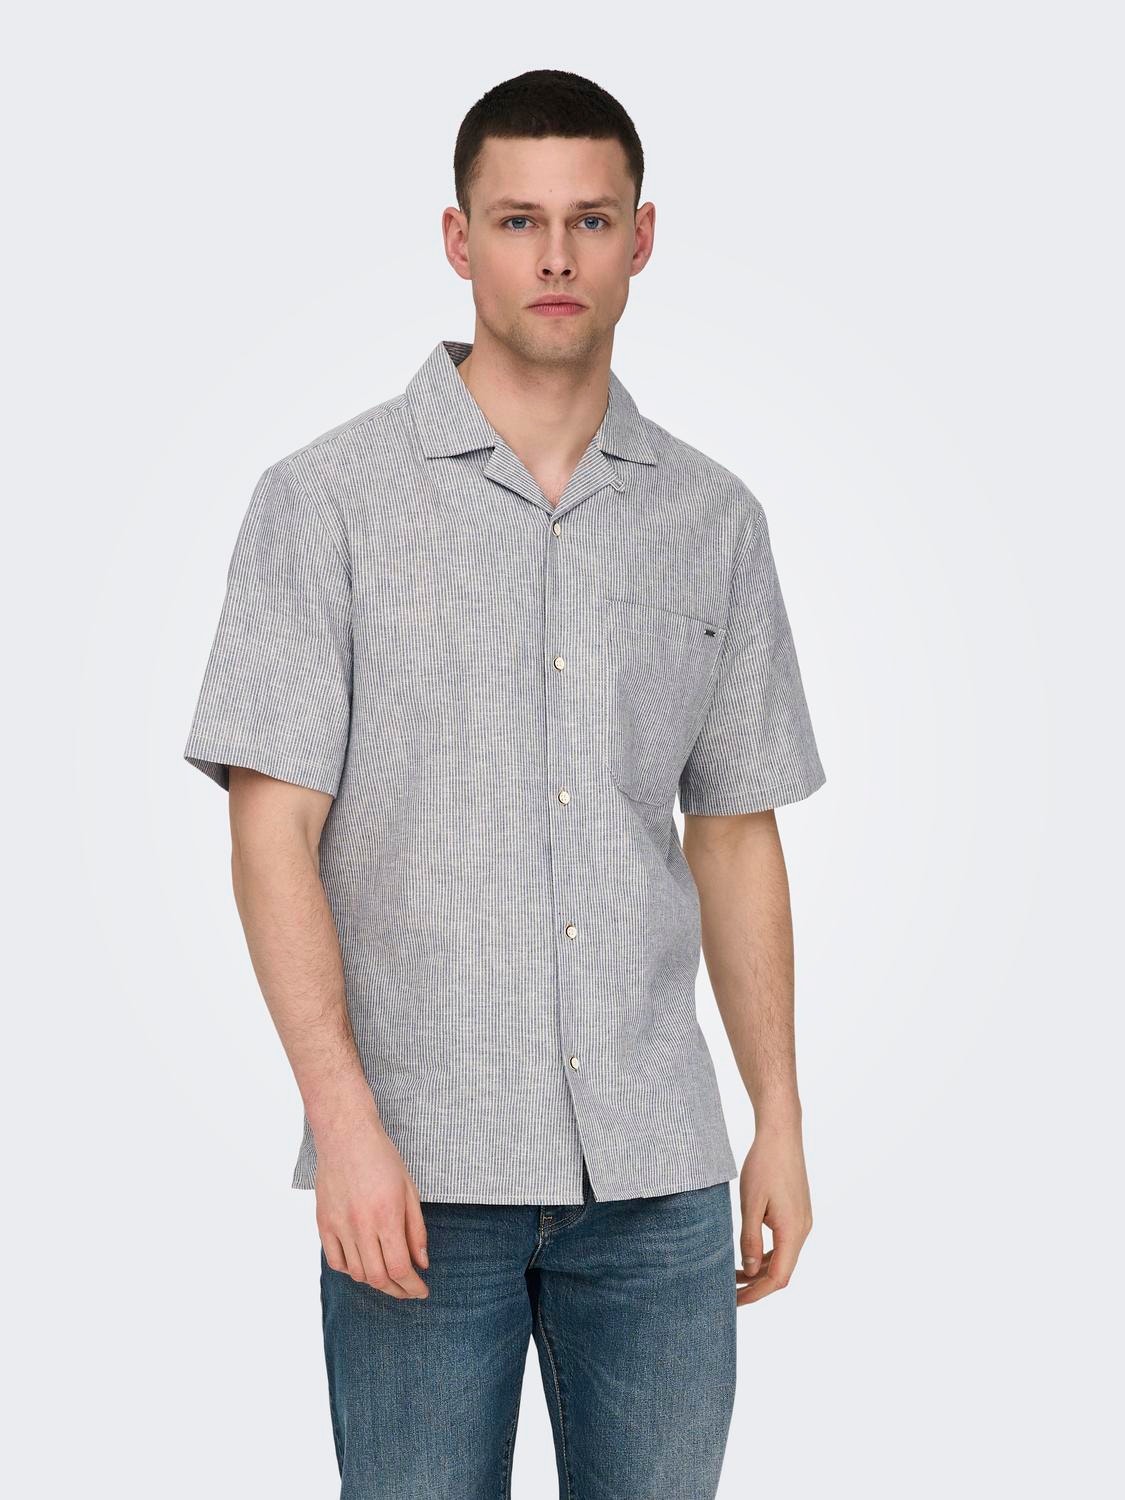 ONLY & SONS Shirt with short sleeves -Bering Sea - 22028833